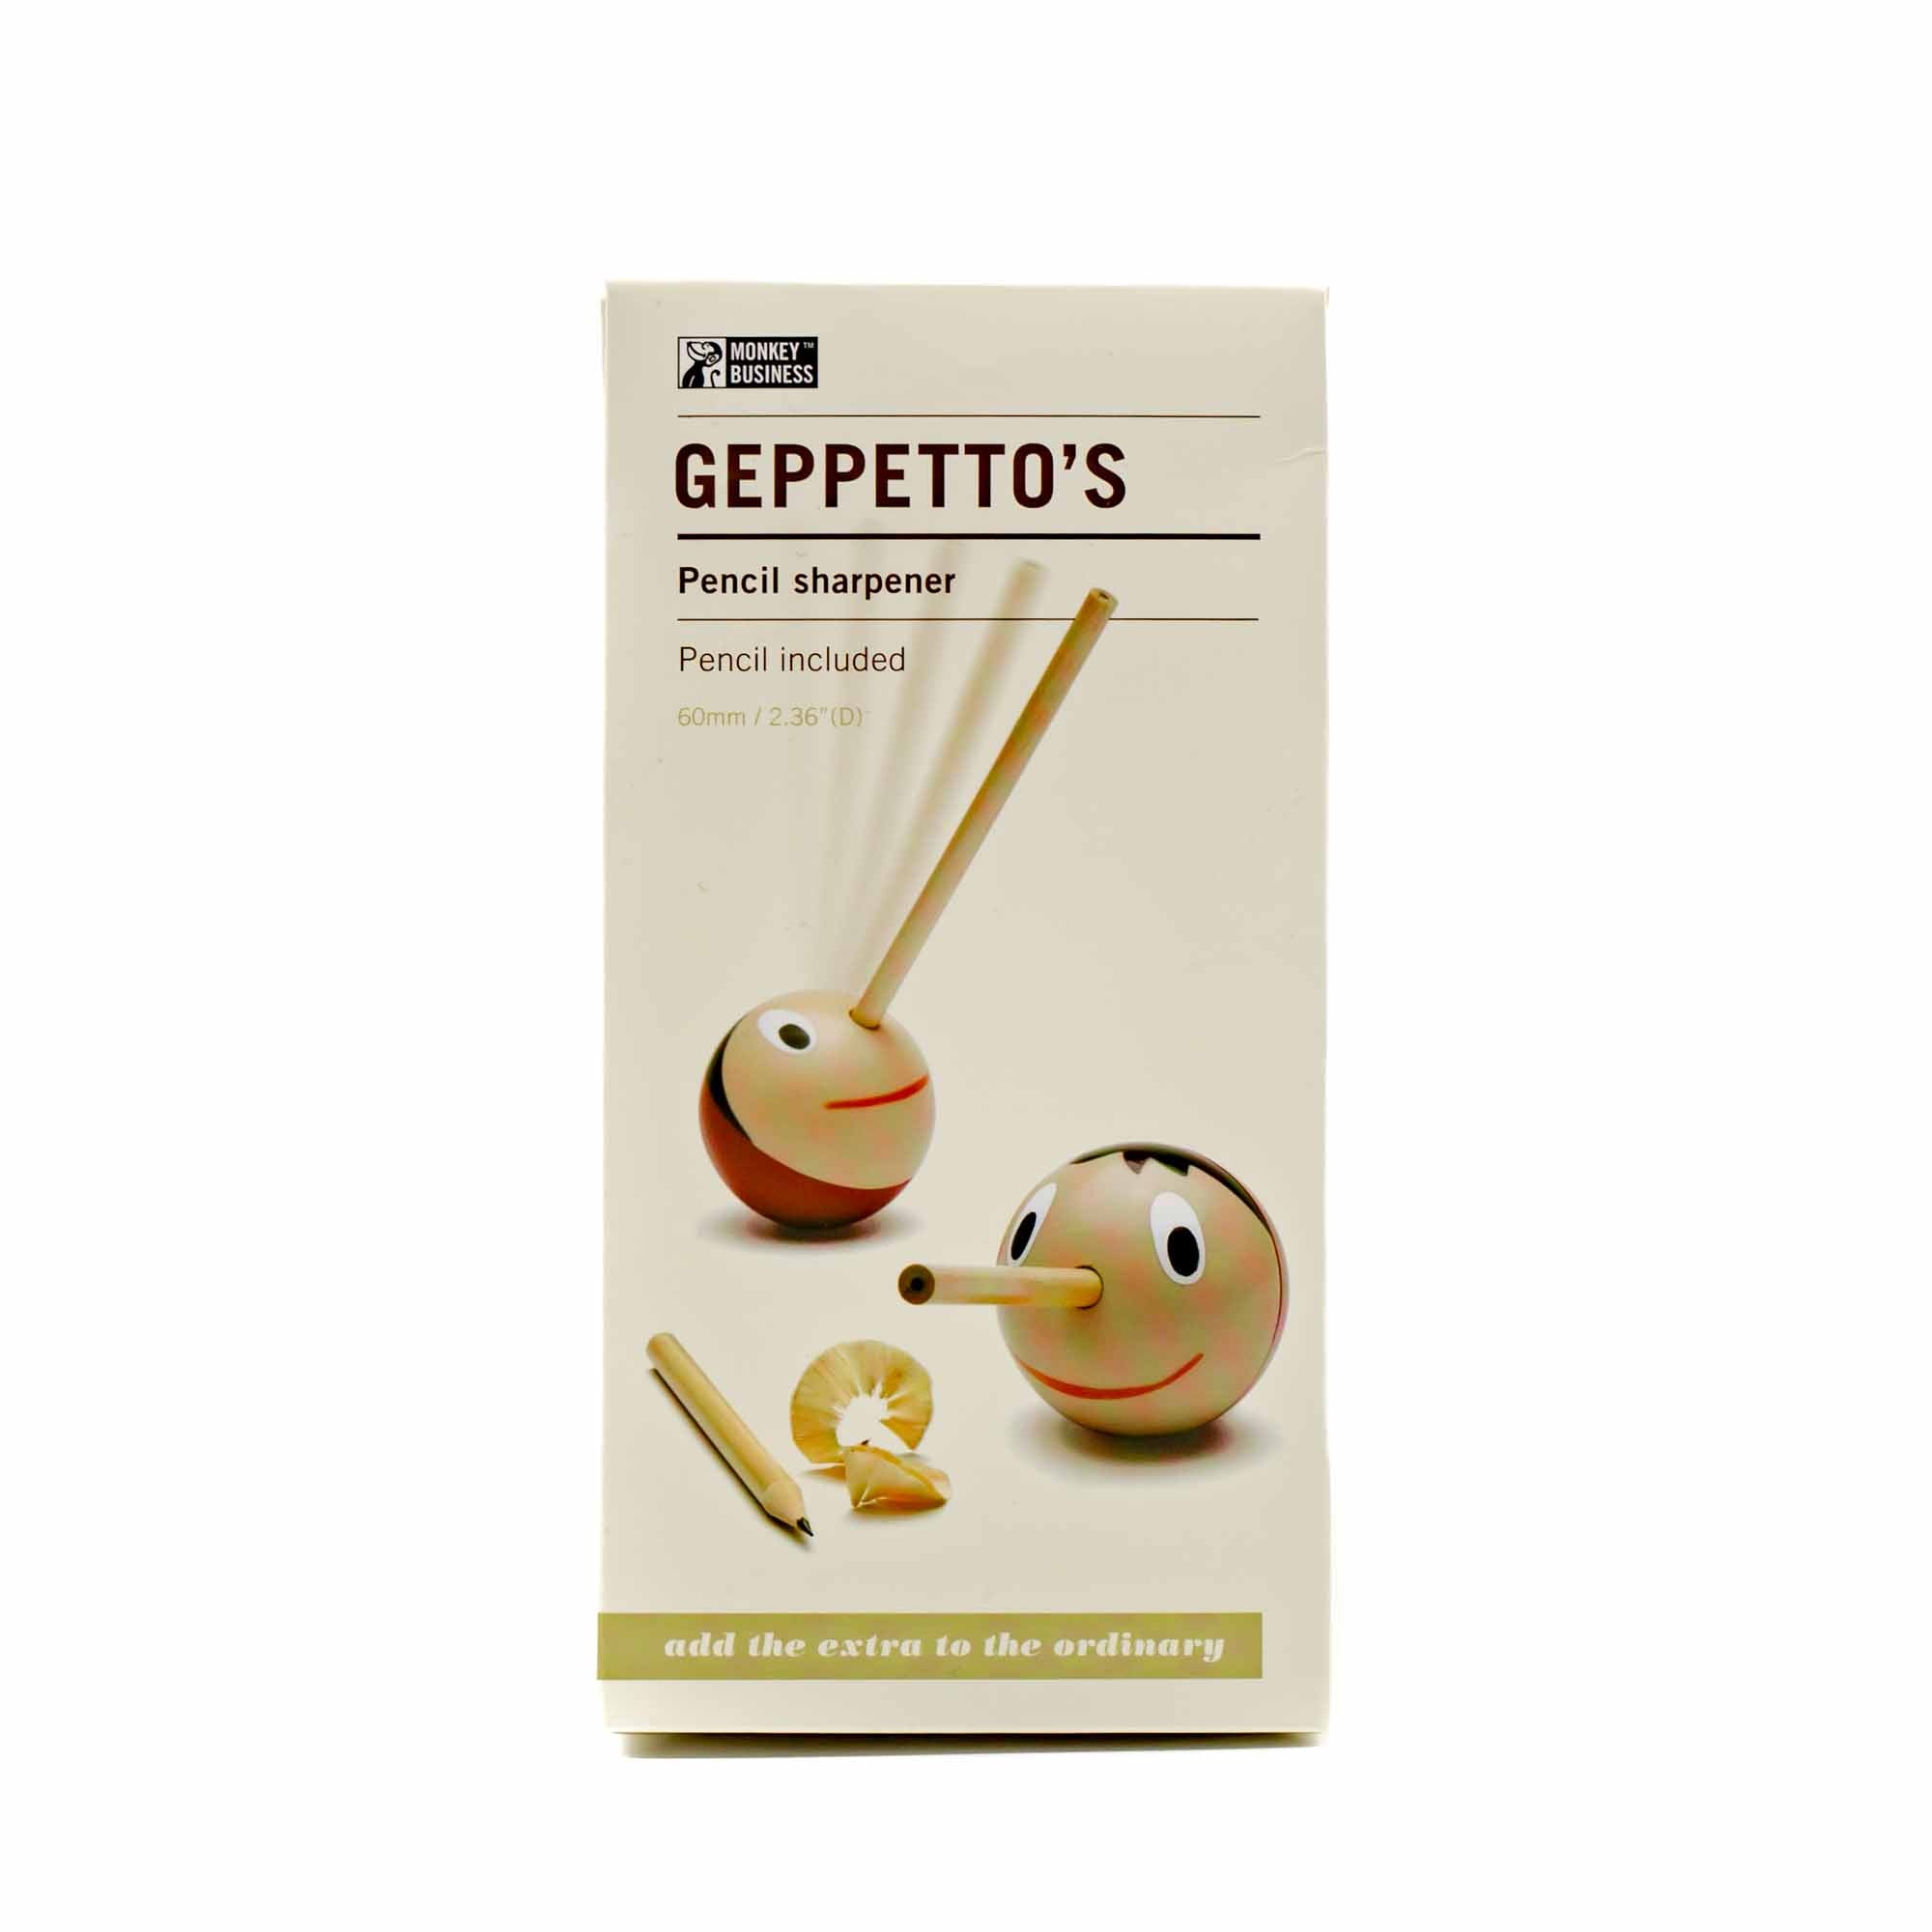 Geppetto's Pencil Sharpener - Mortise And Tenon